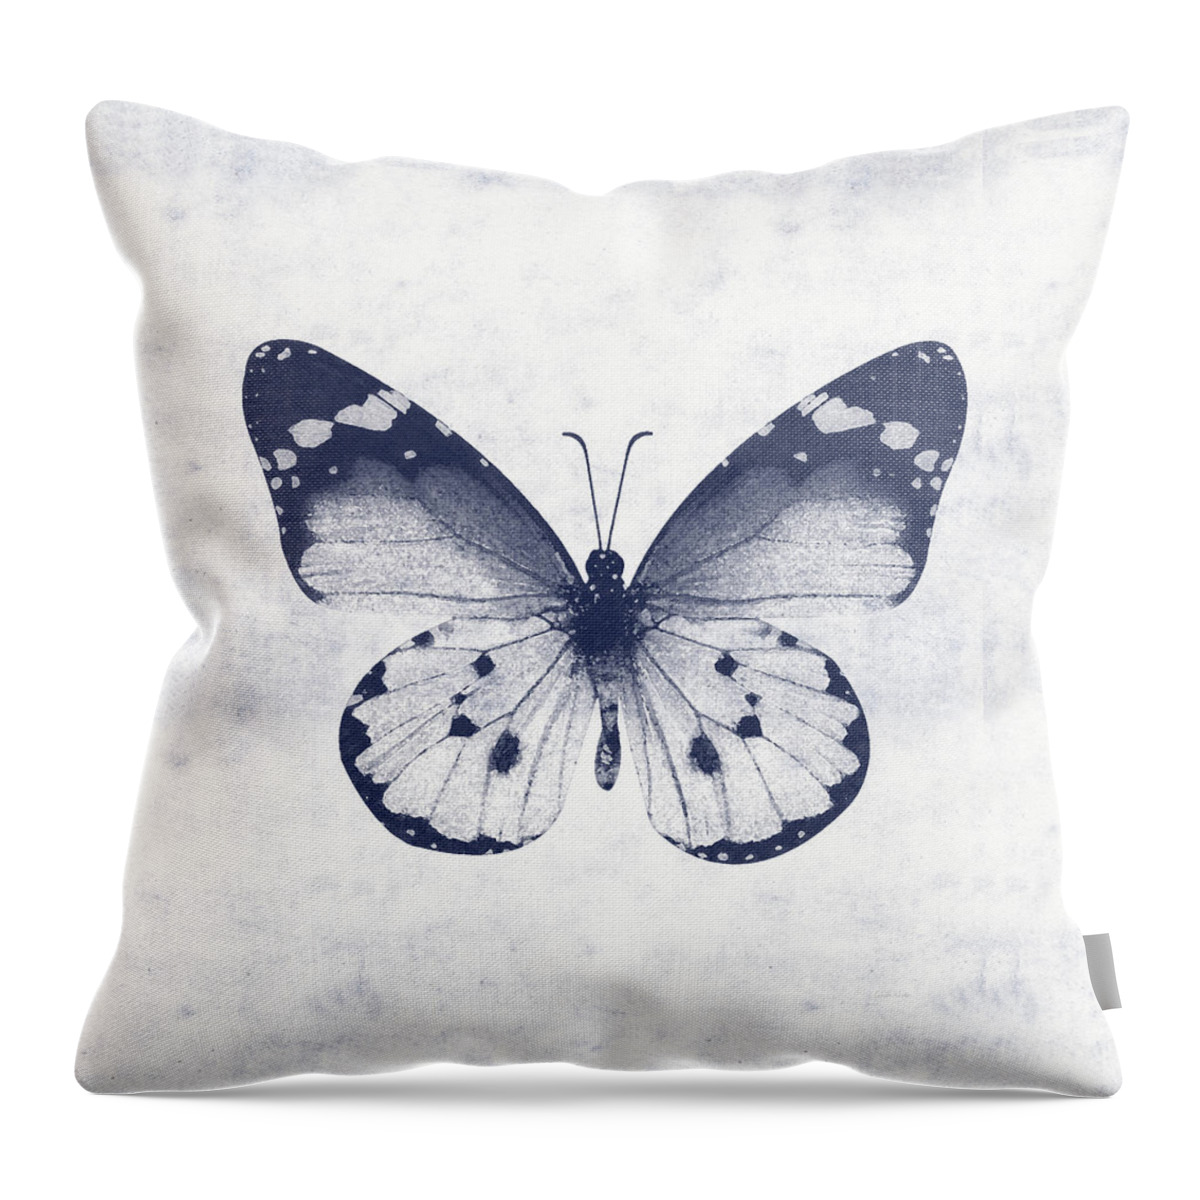 Butterfly White Blue Indigo Skeleton Butterfly Wings Modern Bohemianinsect Bug Garden Nature Organichome Decorairbnb Decorliving Room Artbedroom Artcorporate Artset Designgallery Wallart By Linda Woodsart For Interior Designersgreeting Cardpillowtotehospitality Arthotel Artart Licensing Throw Pillow featuring the mixed media Indigo and White Butterfly 1- Art by Linda Woods by Linda Woods